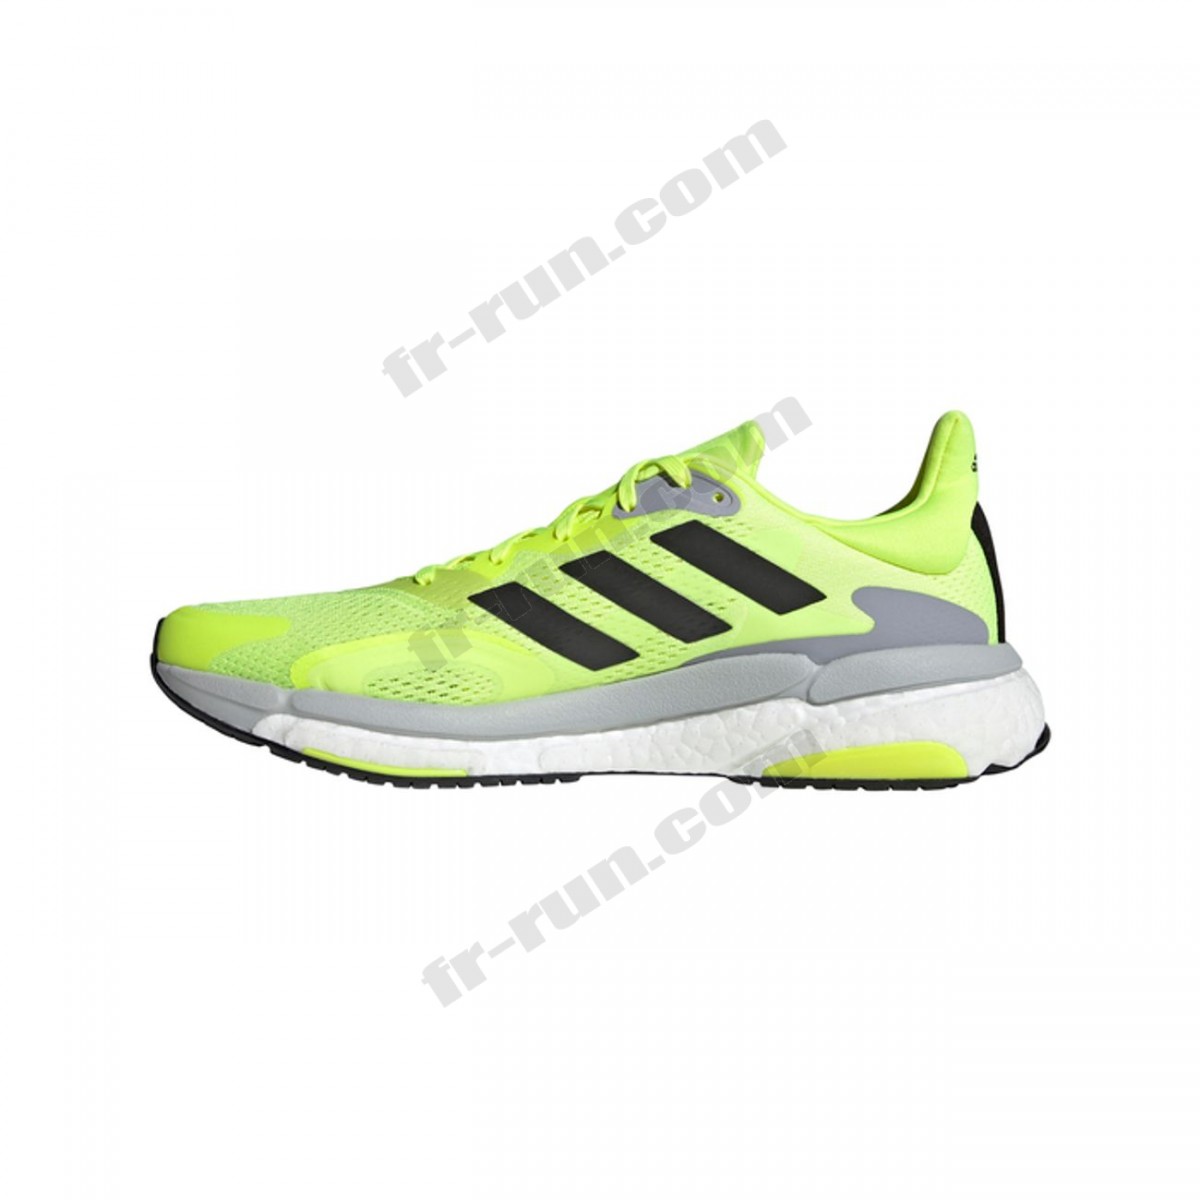 Adidas/CHAUSSURES BASSES running homme ADIDAS SOLAR BOOST 21 M √ Nouveau style √ Soldes - -1